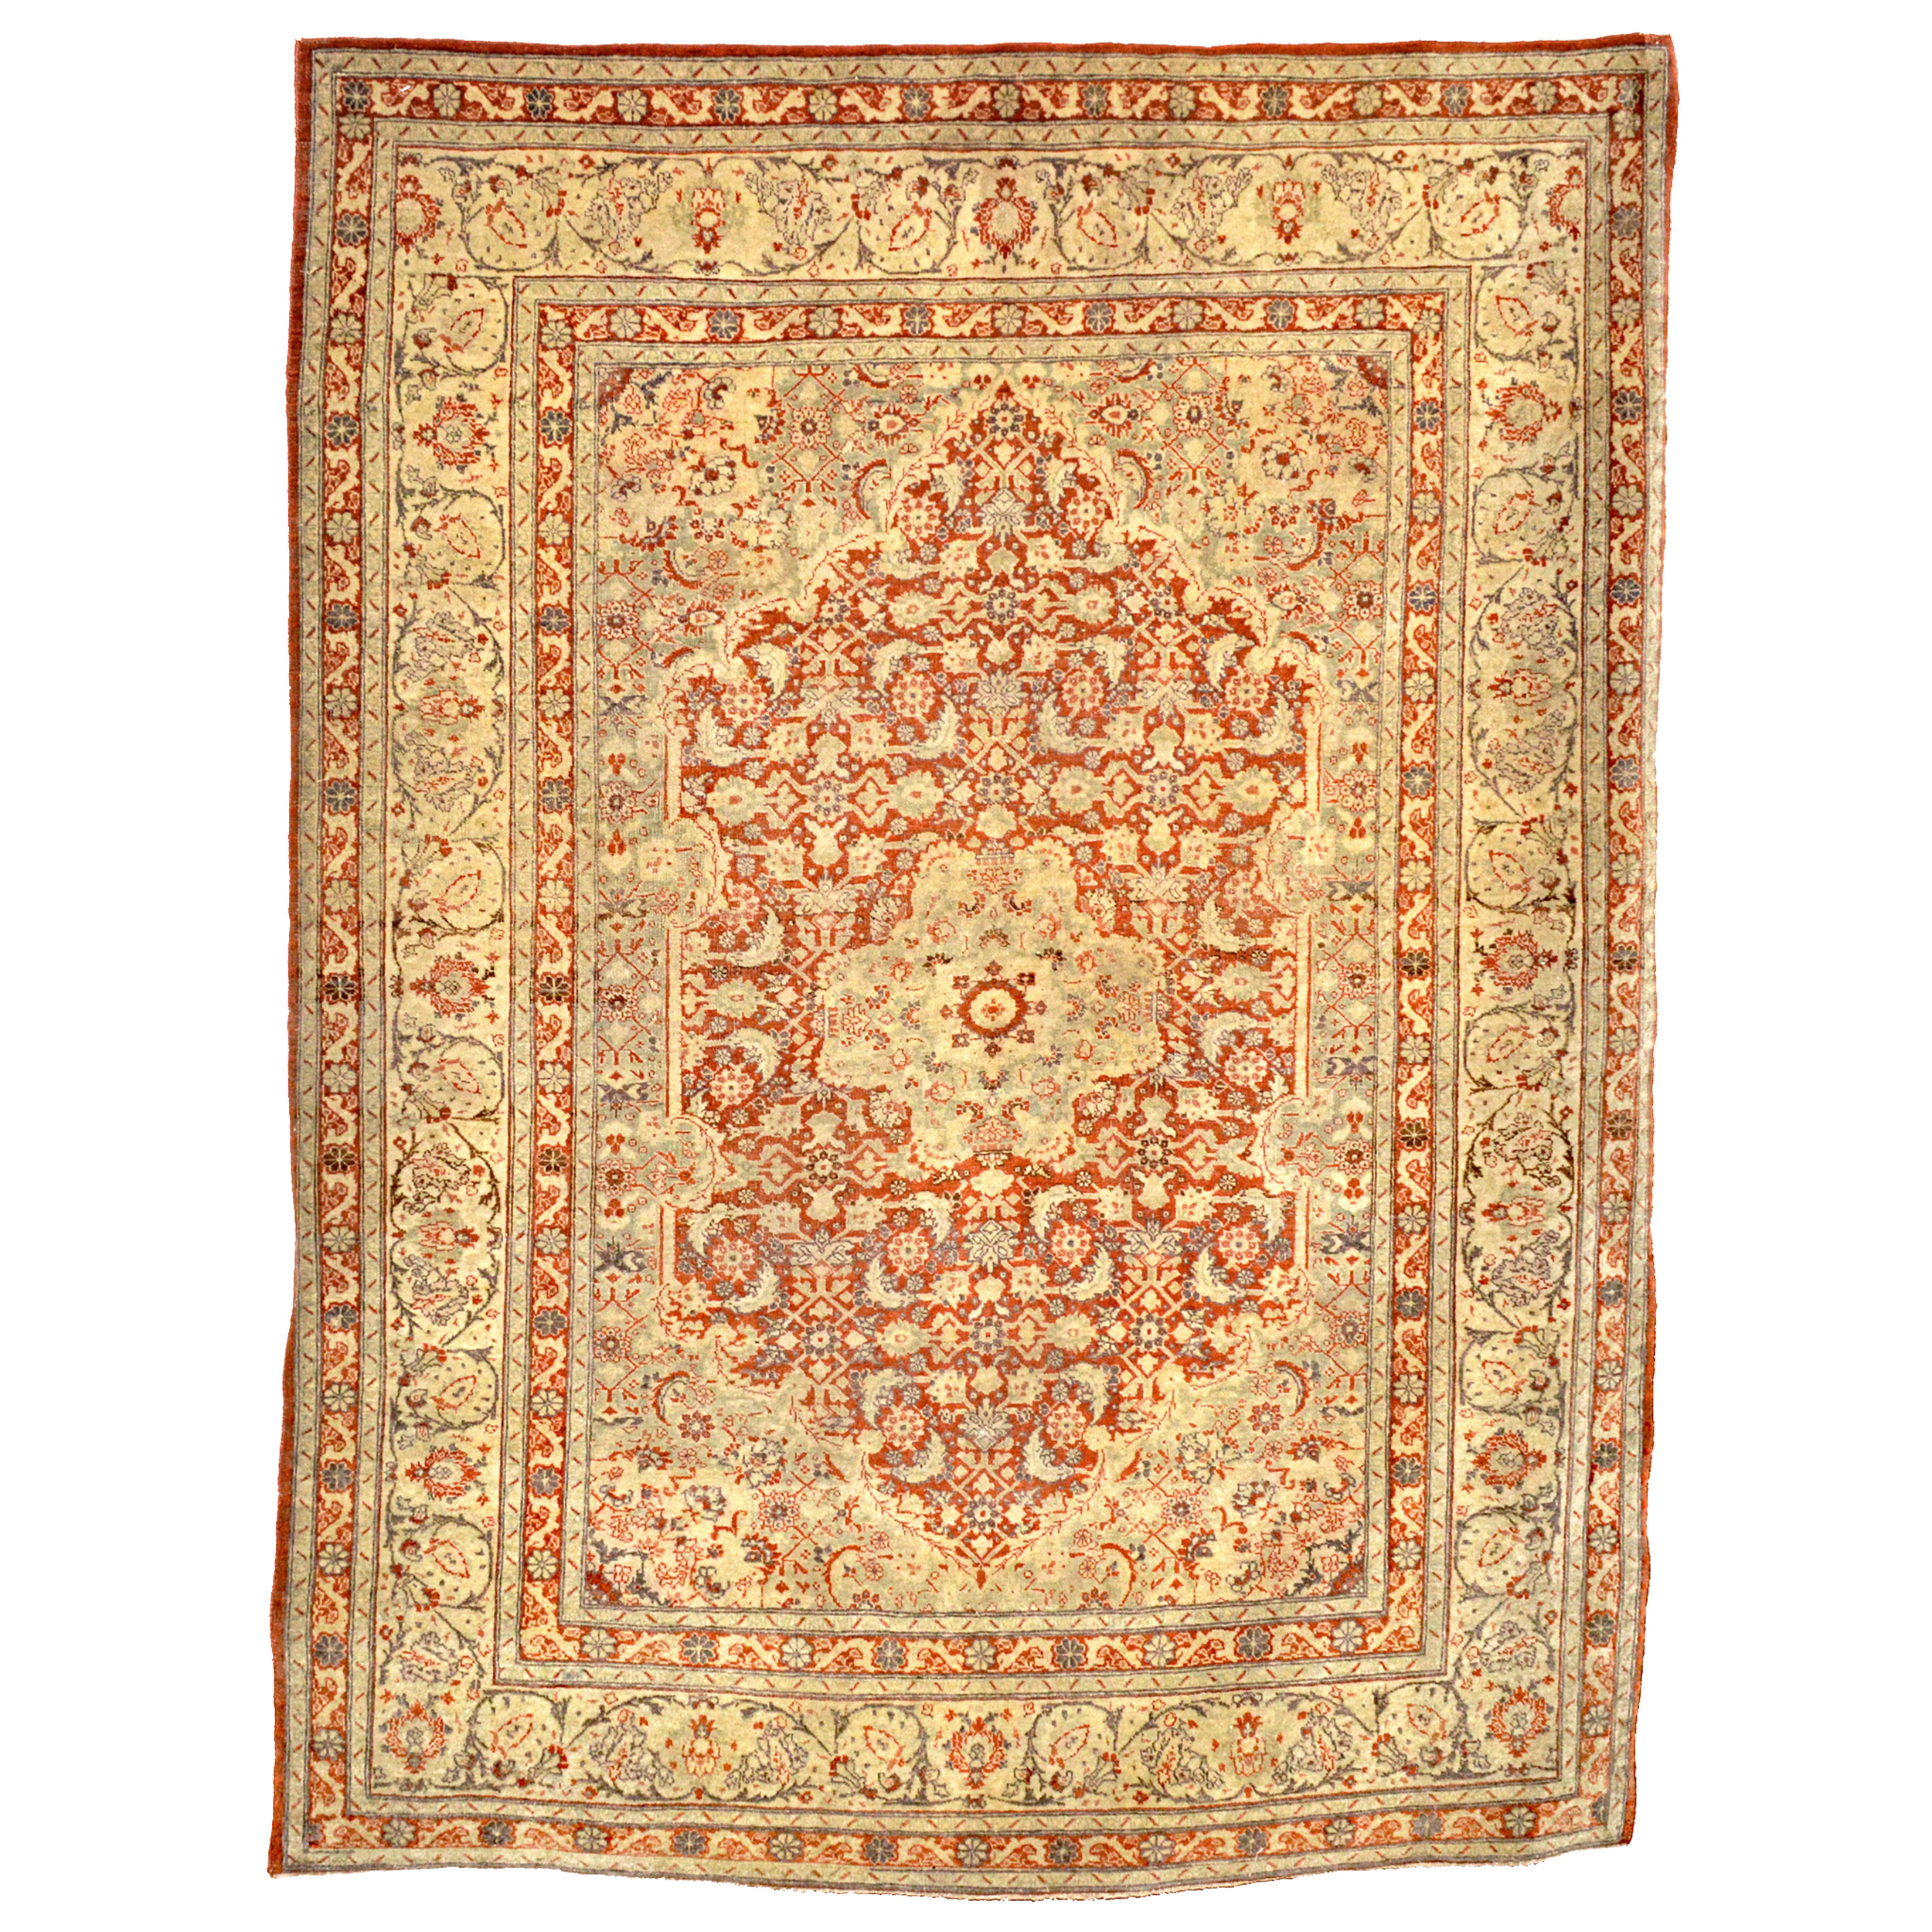 A fine late 19th century Persian Tabriz rug with the classical "Herati" design on a light terra cotta color field that is framed by an ivory border. Boston,MA area based Douglas Stock Gallery is one of America's most selective dealers in antique Oriental rugs. Antiquerugs Brookline, Newton, Wellesley, Natick,MA area